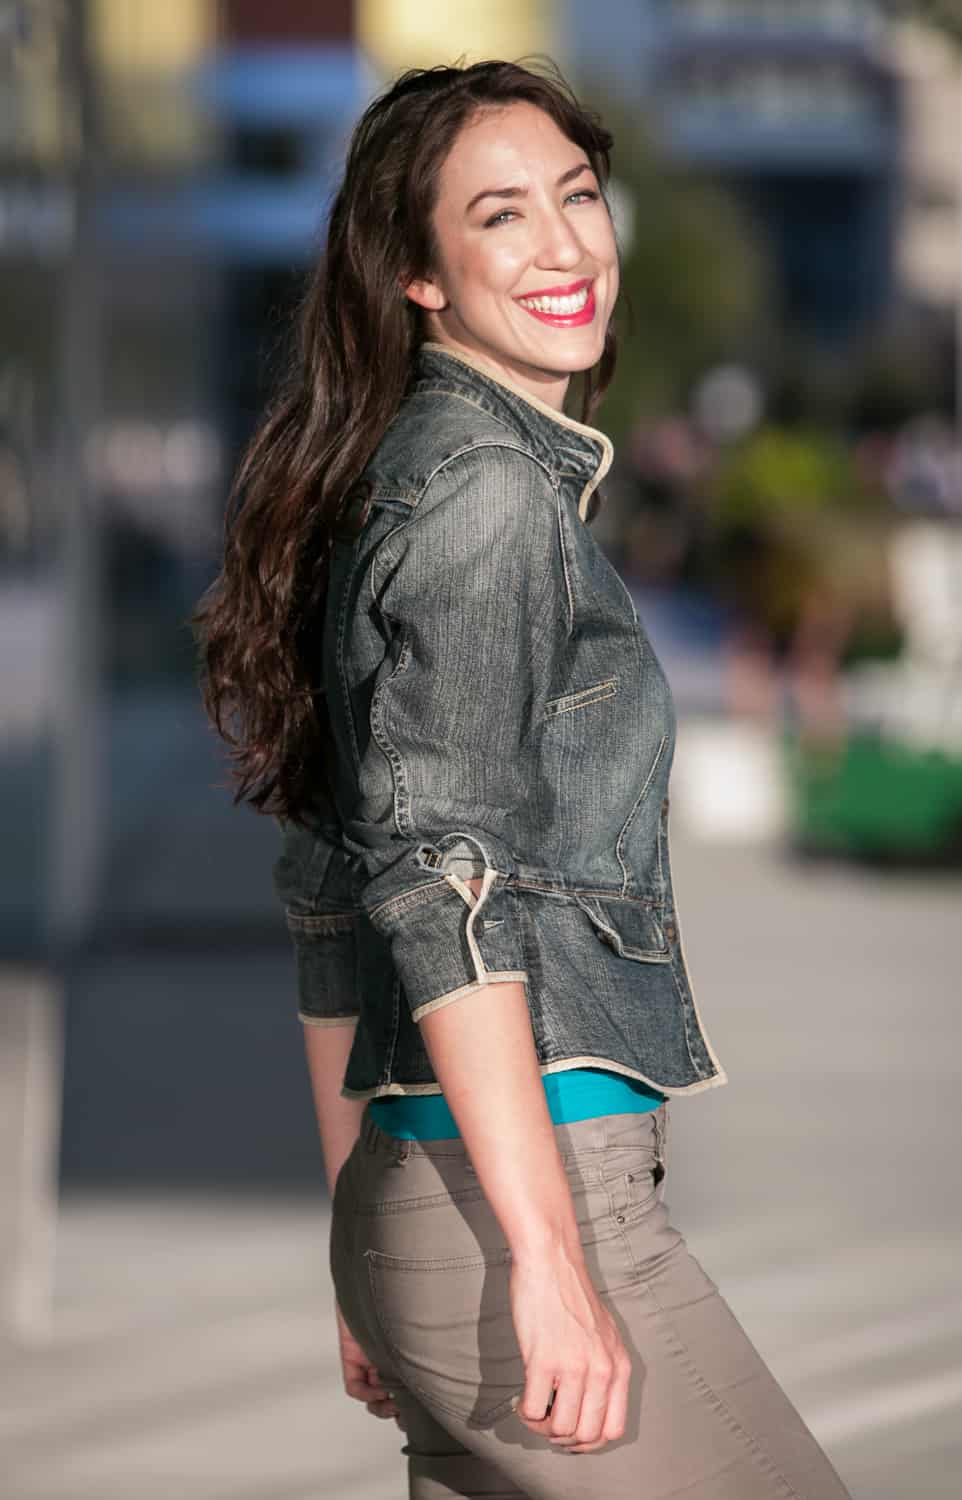 Headshot of model with long dark hair and jean jacket